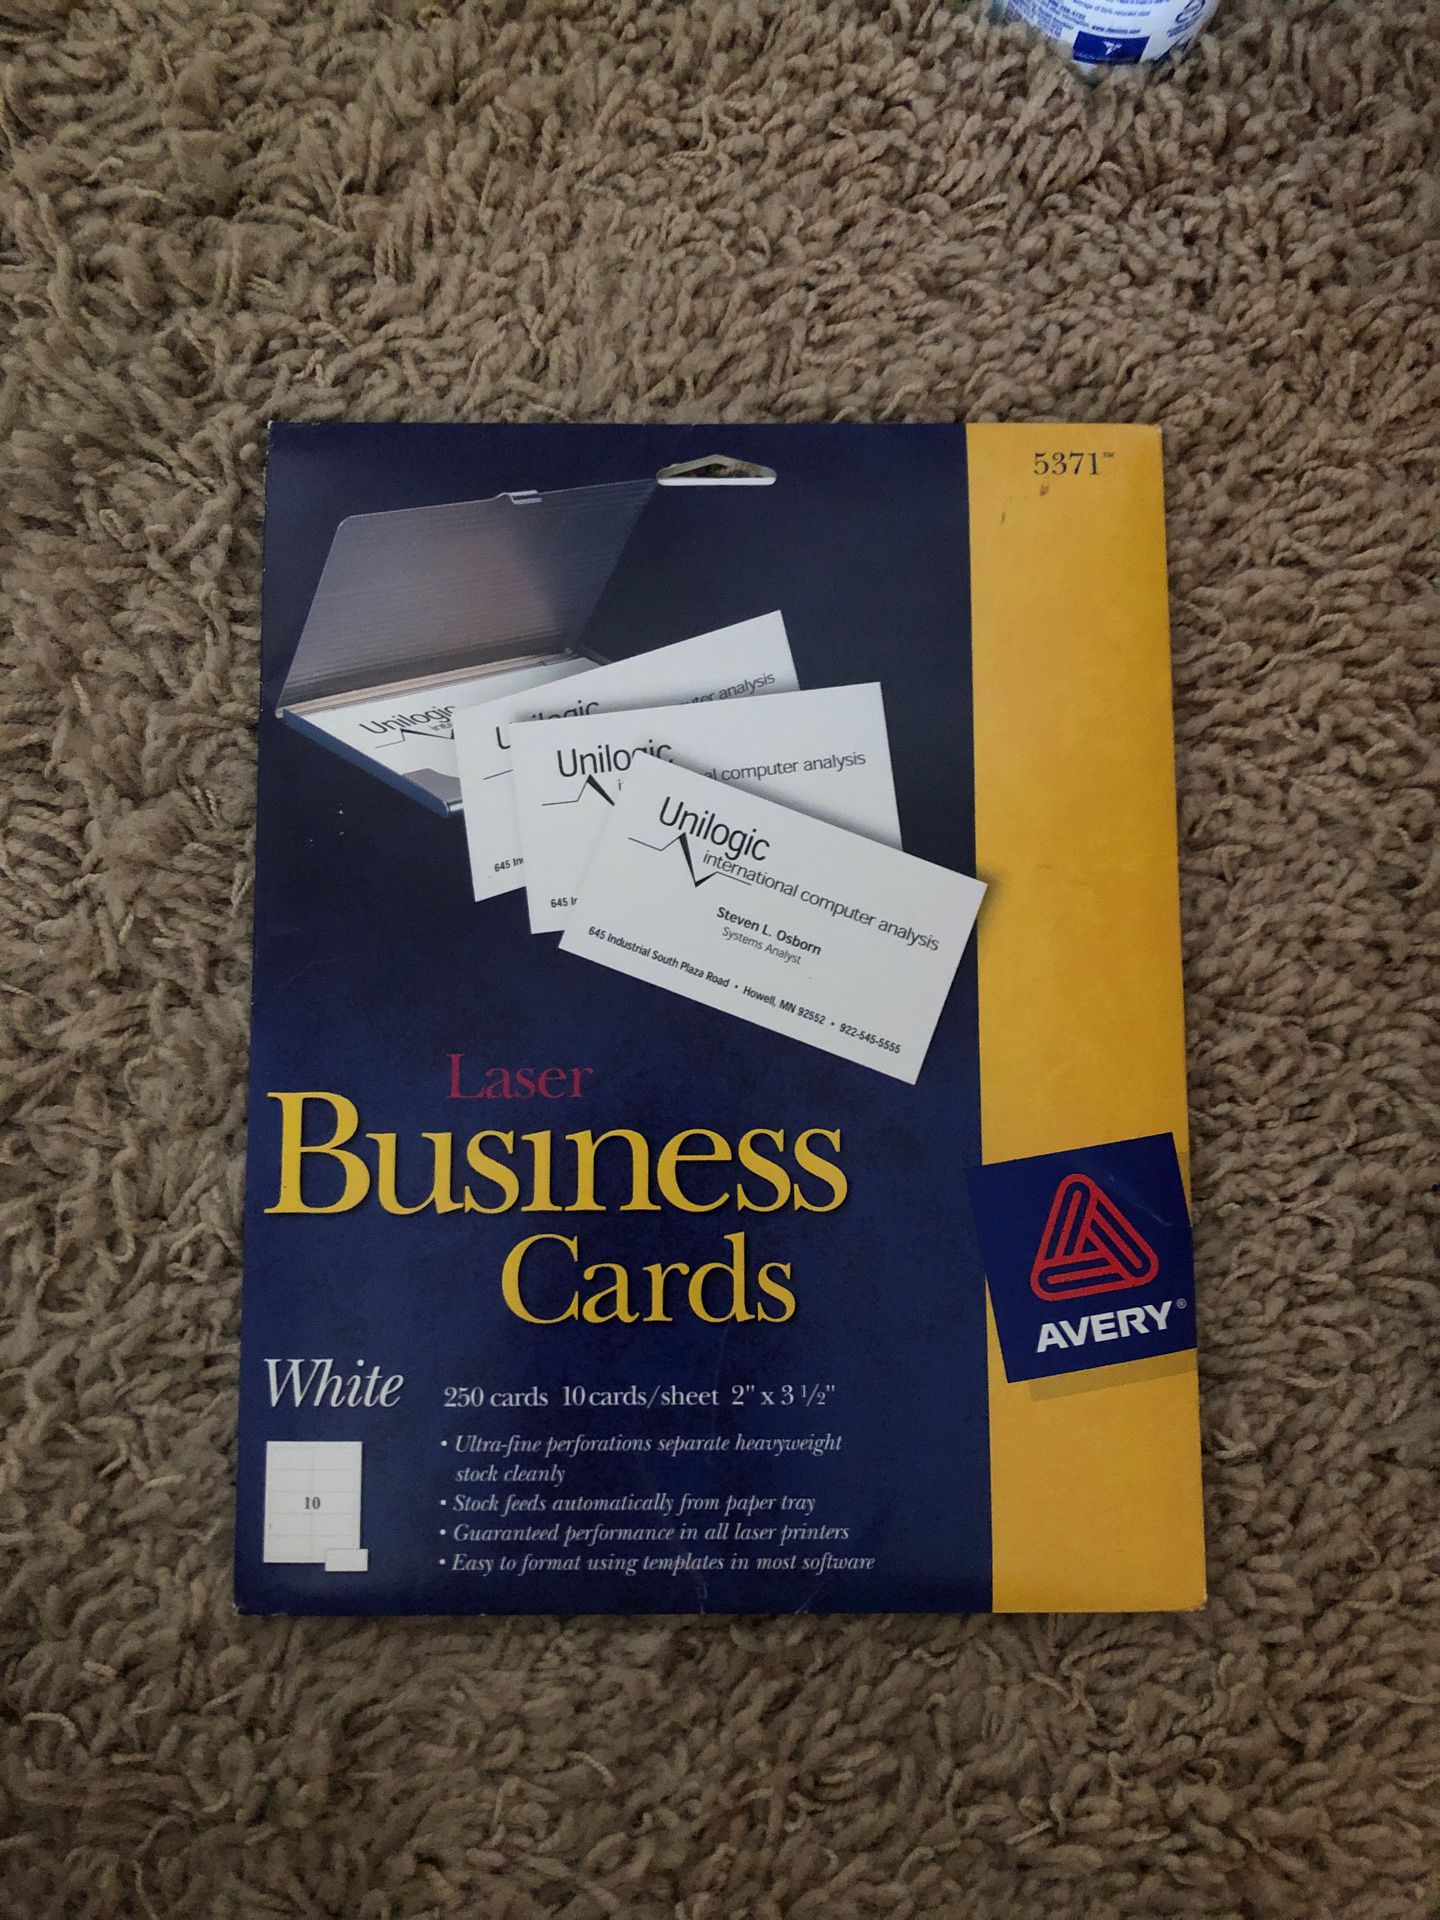 New Laser Business Cards White 250 cards 10 cards/sheets 2” x 3.5”